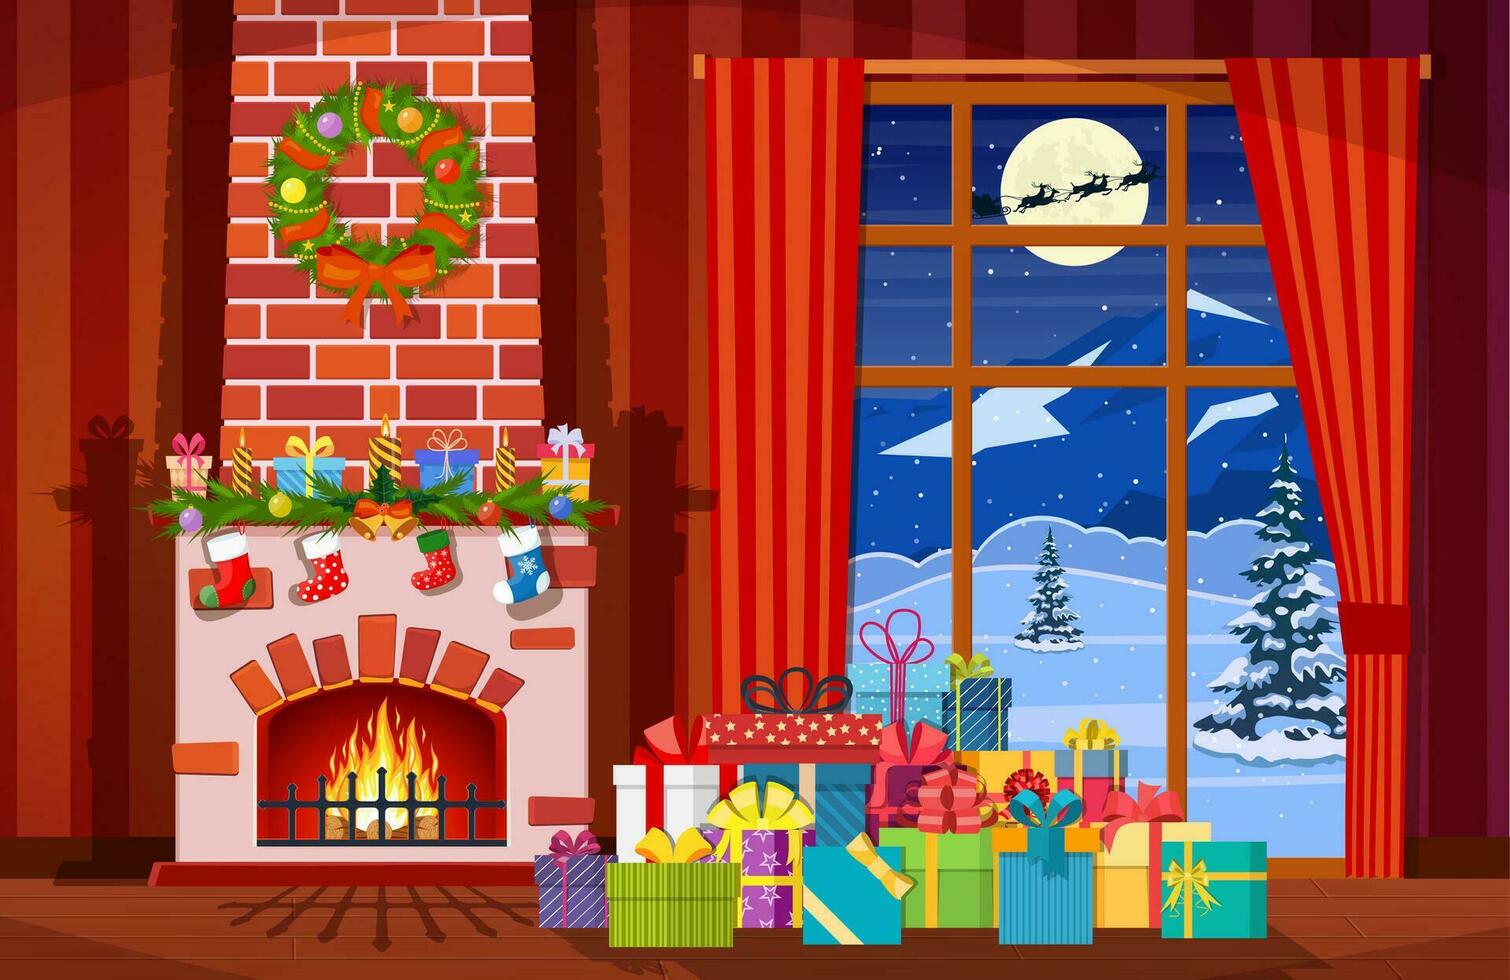 Christmas interior of room with window, gifts and decorated fireplace. Happy new year decoration. Merry christmas holiday. New year and xmas celebration. Vector illustration flat style